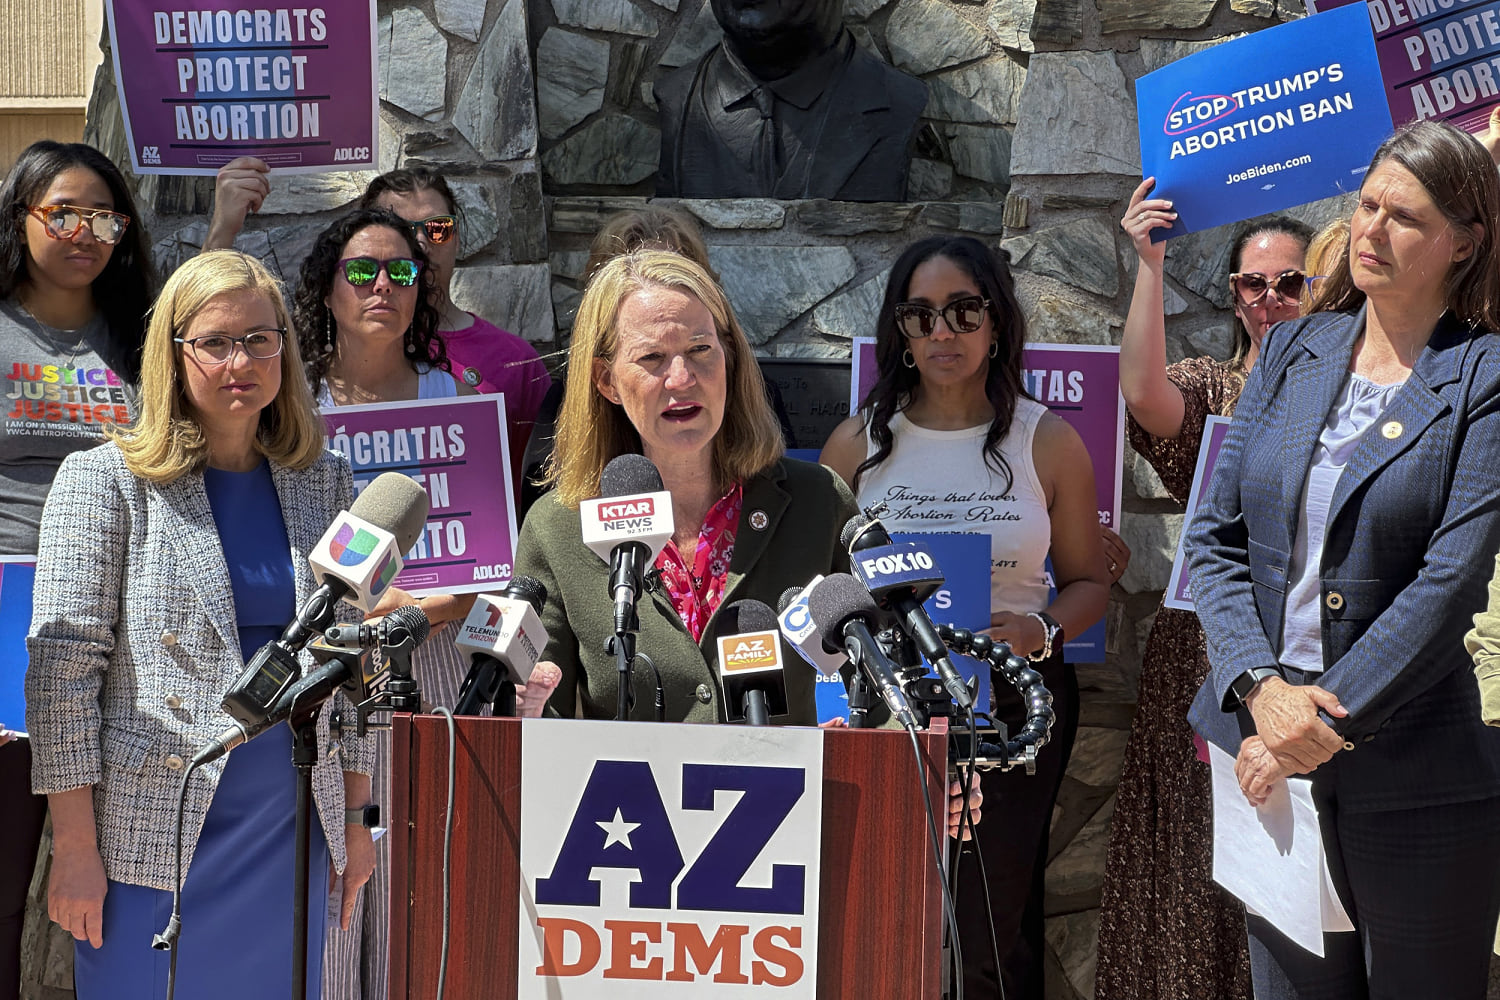 Arizona AG wants California to be 'safe haven' for abortion providers after ban ruling